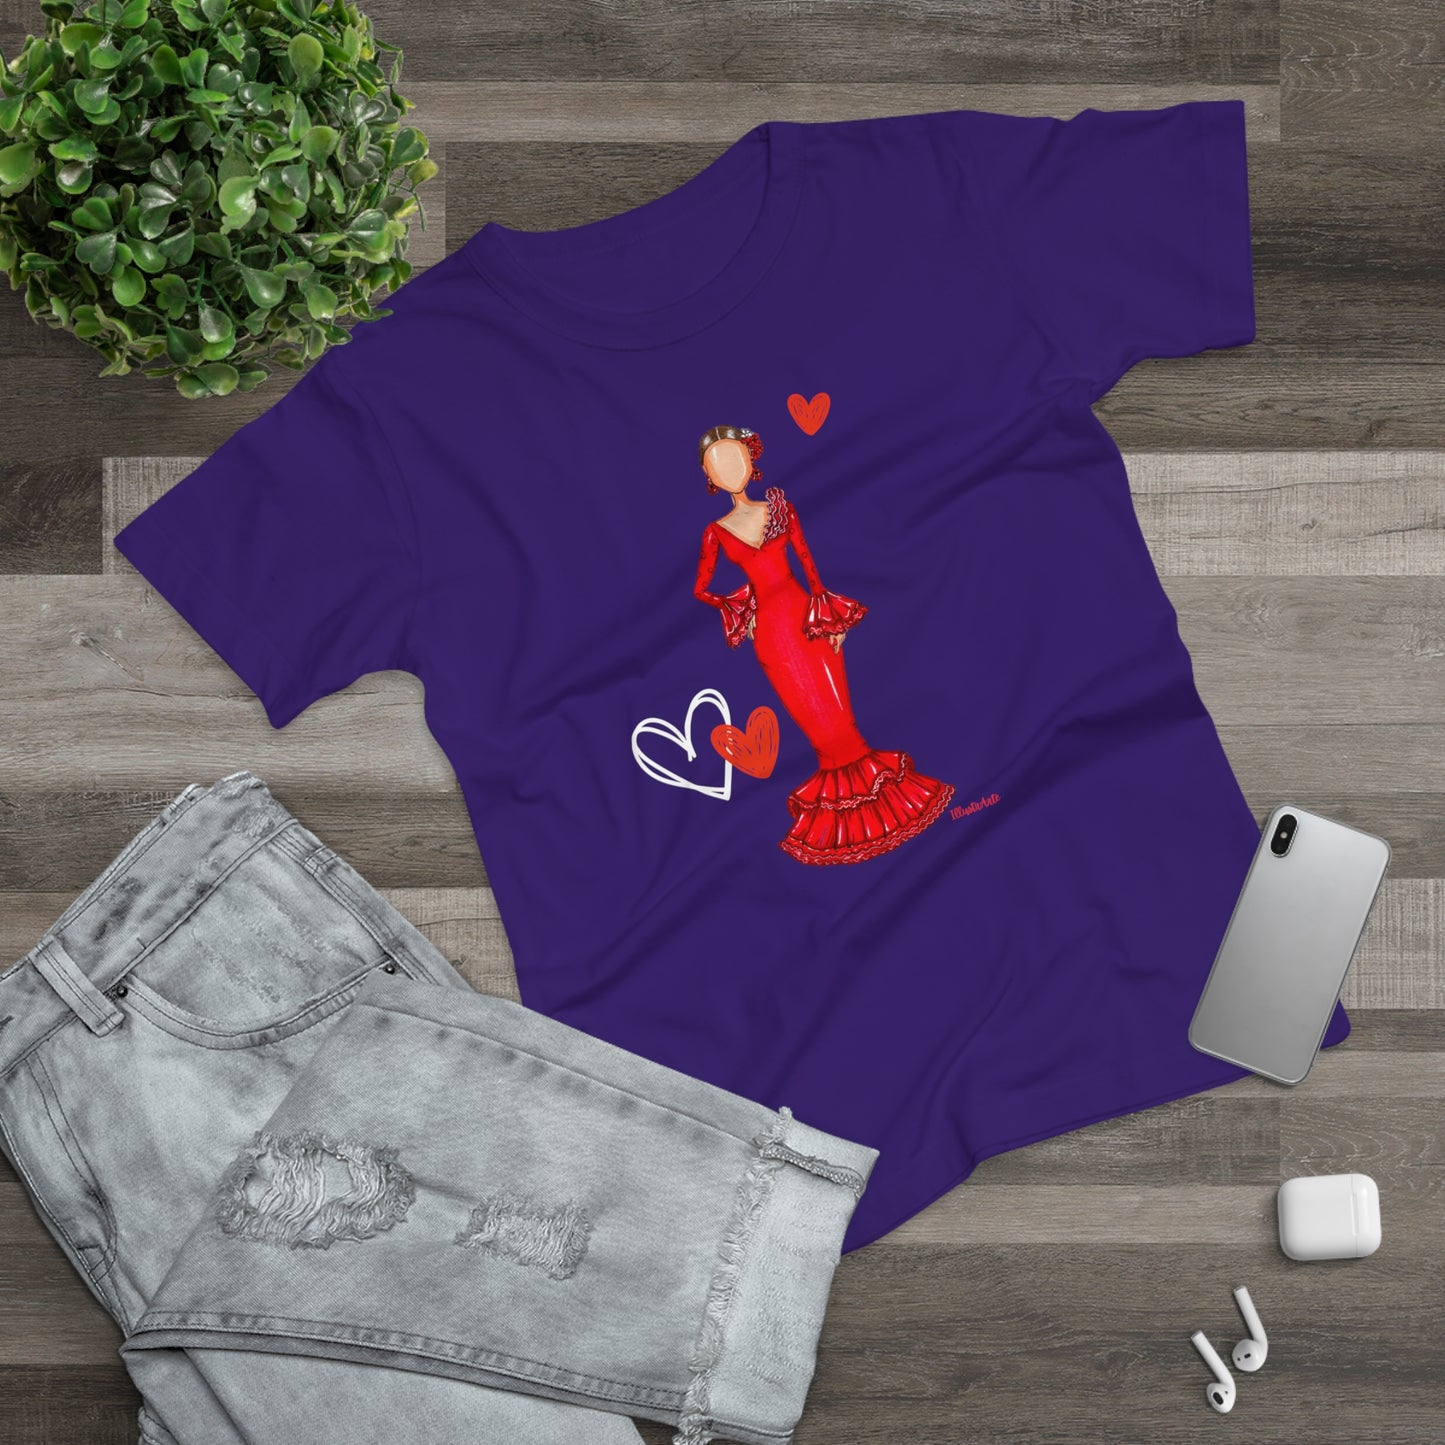 a purple shirt with a picture of a woman in a red dress